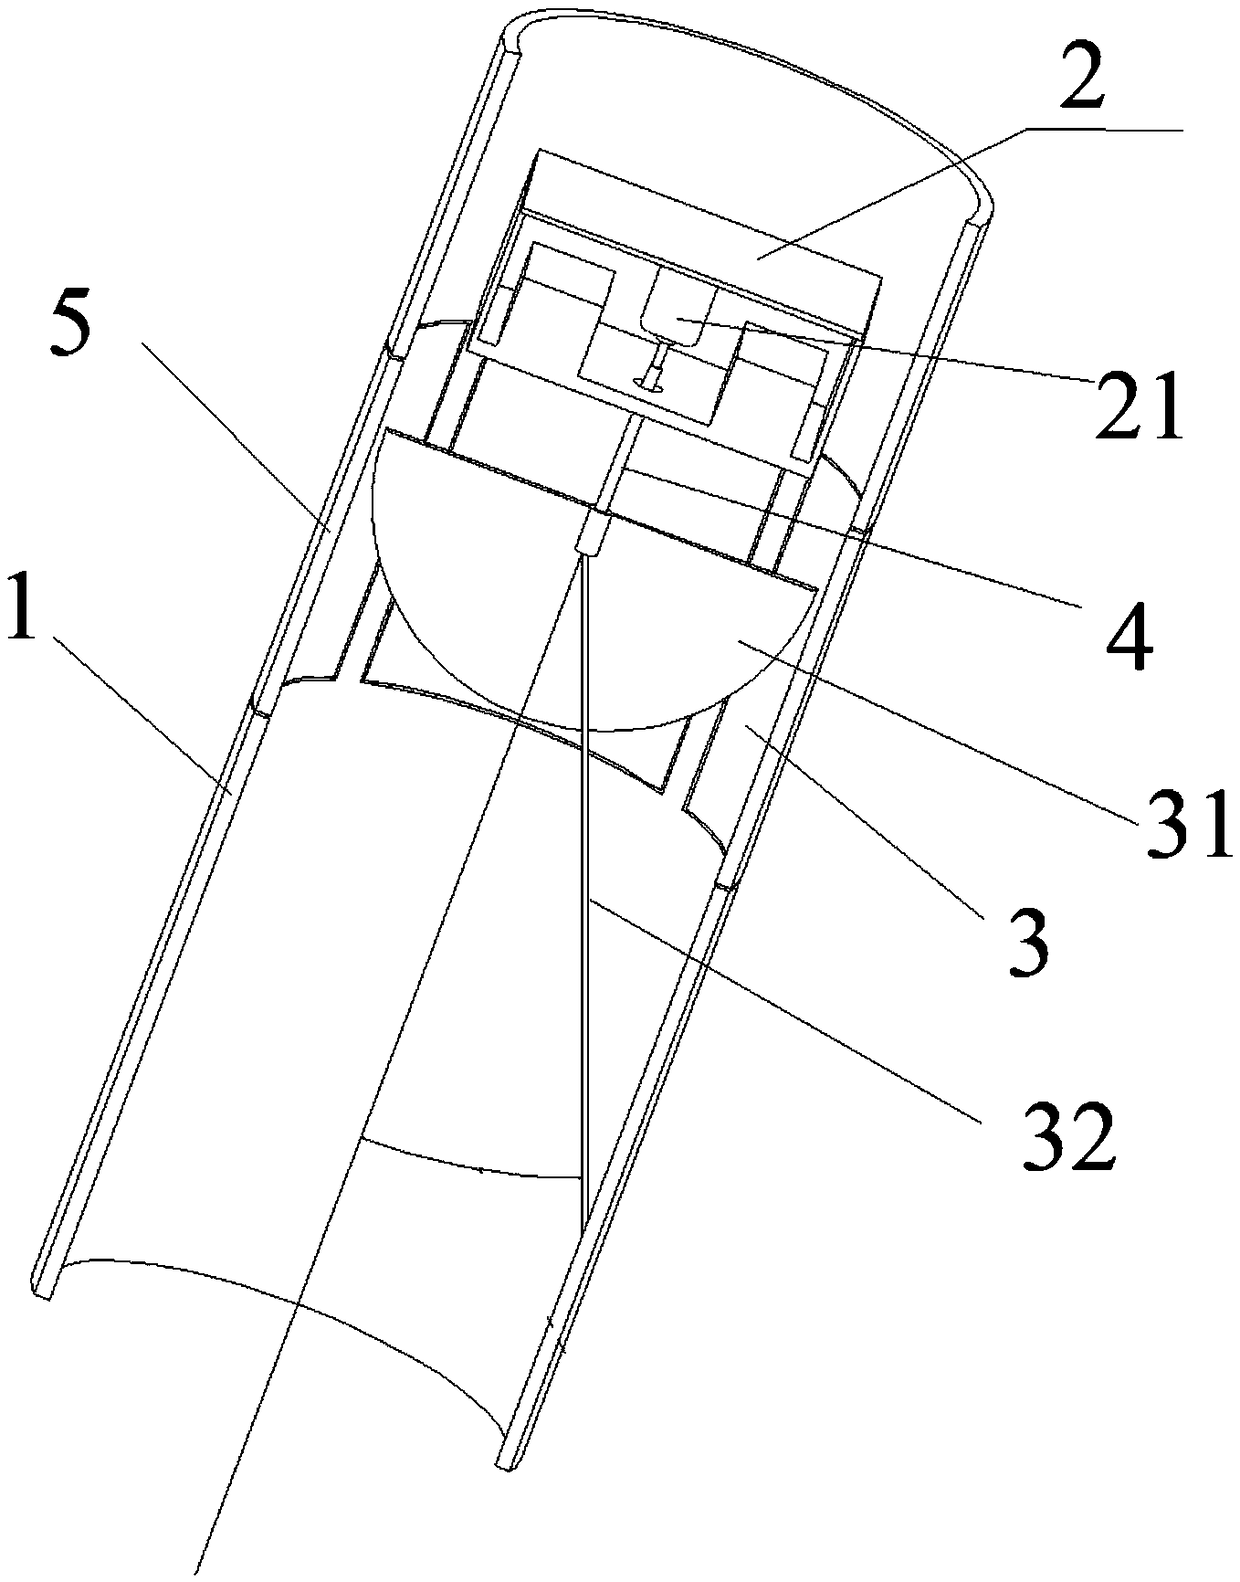 Plumb weight measurable deflection device